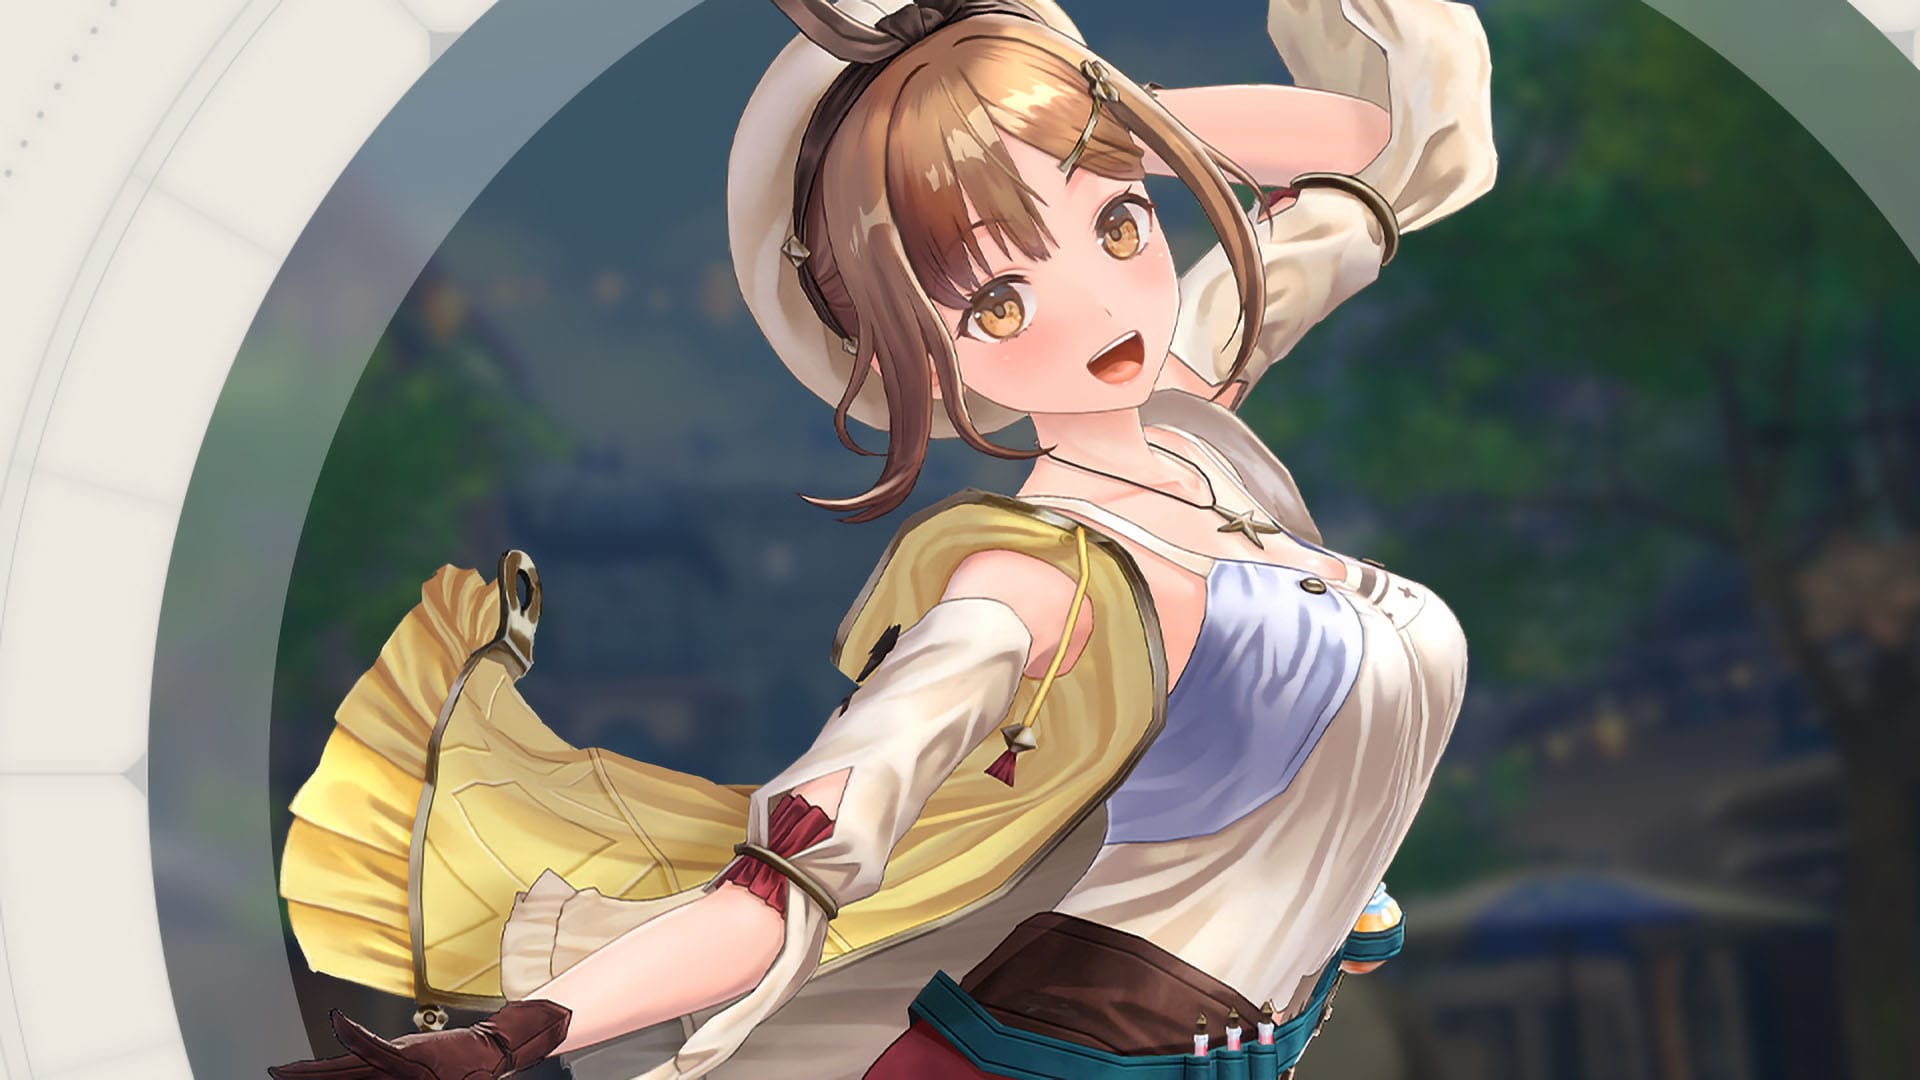 Atelier Resleriana Gets New Trailers Introducing Ryza & Lent from Atelier Ryza